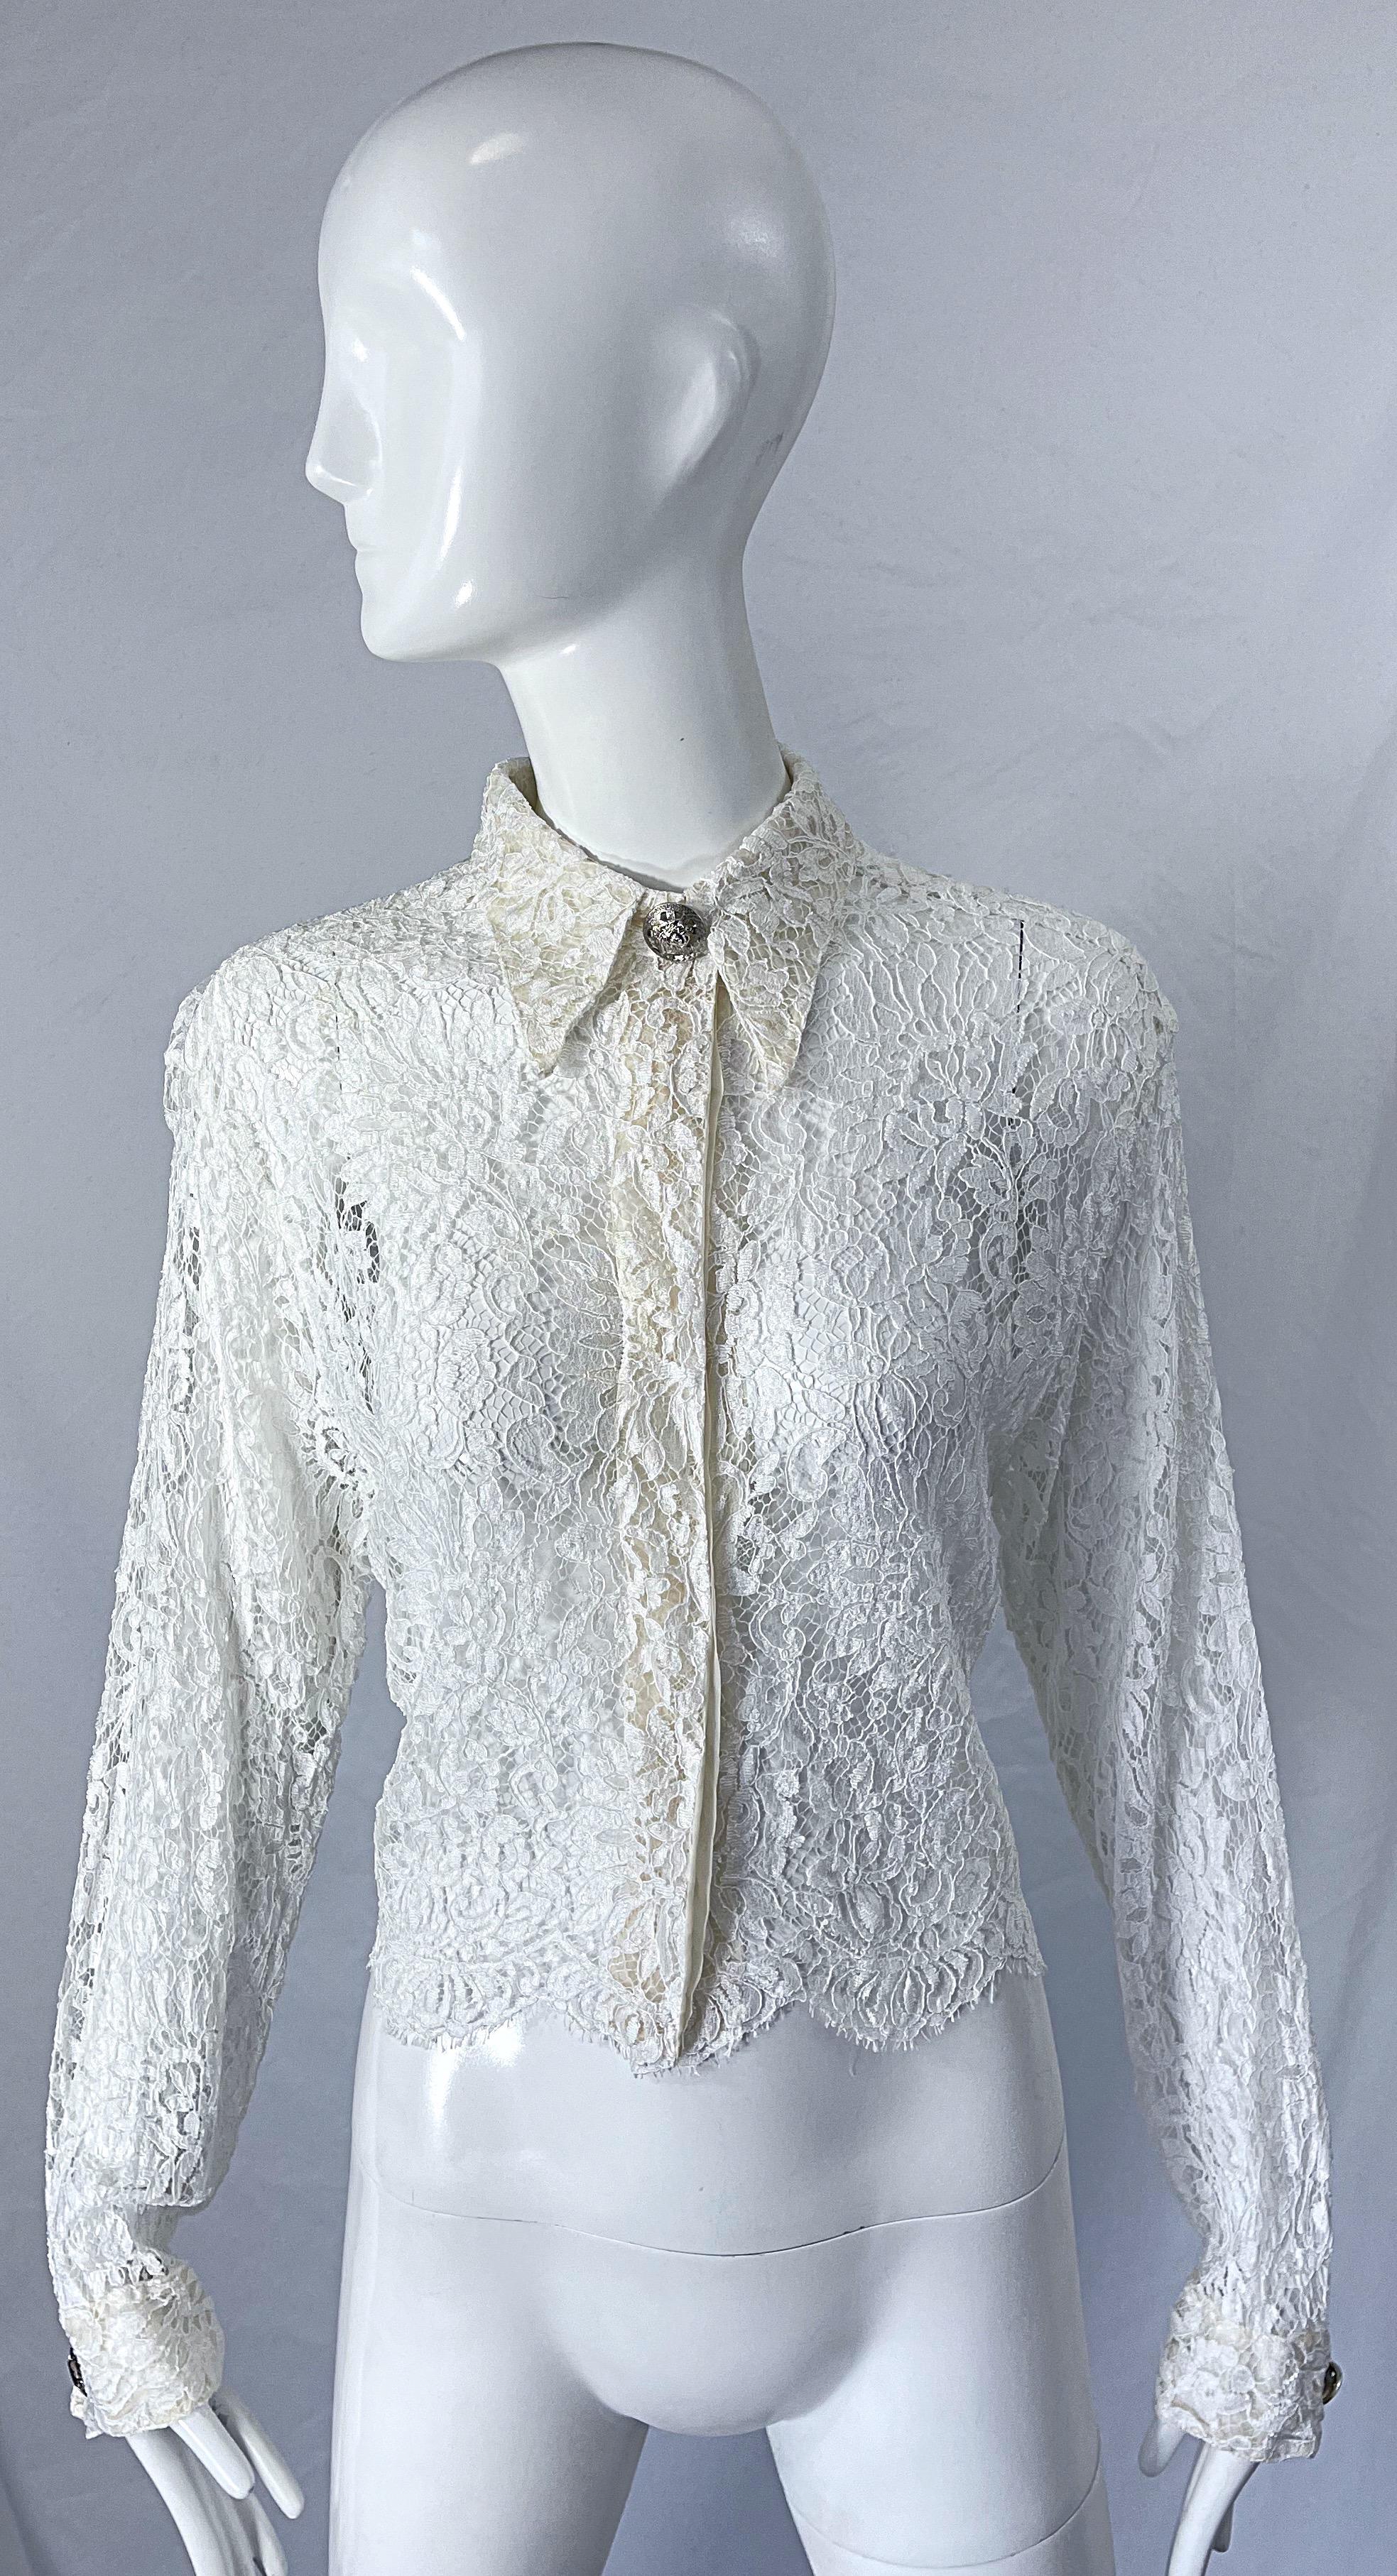 Sexy and rare early 1990s GIANNI VERSACE COUTURE white lace sheer blouse ! Features silk French chantiliy lace with hidden buttons up the front center. Large silver Medusa buttons at center collar and at each sleeve cuff. 
Can easily be dressed up